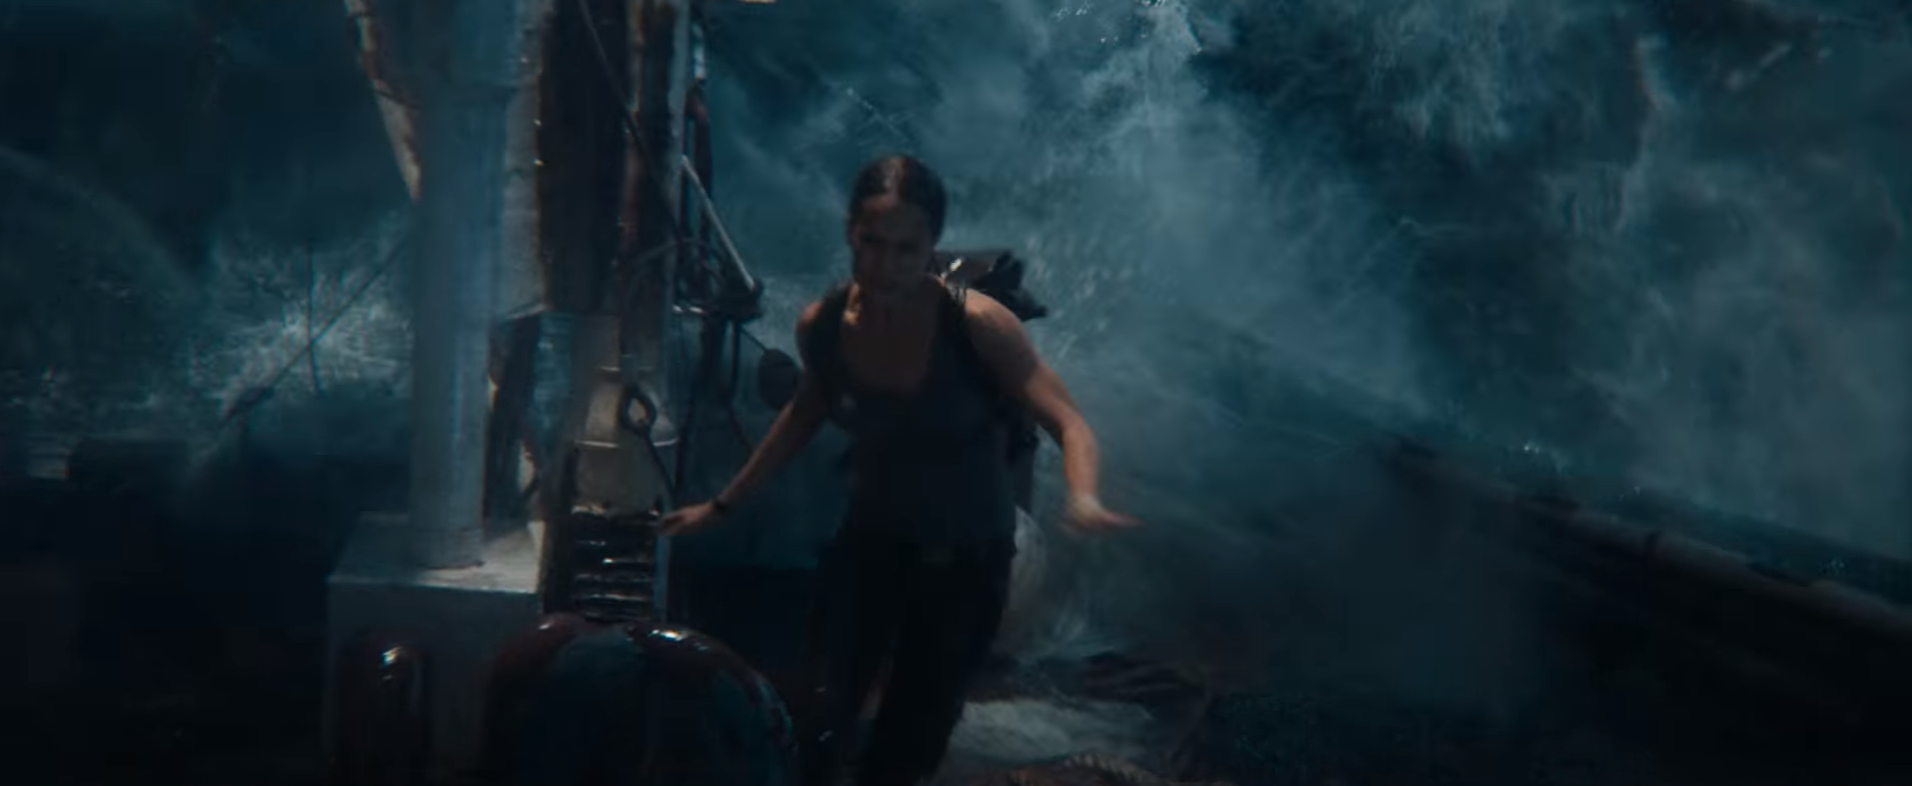 First Trailer For Tomb Raider Starring Alicia Vikander